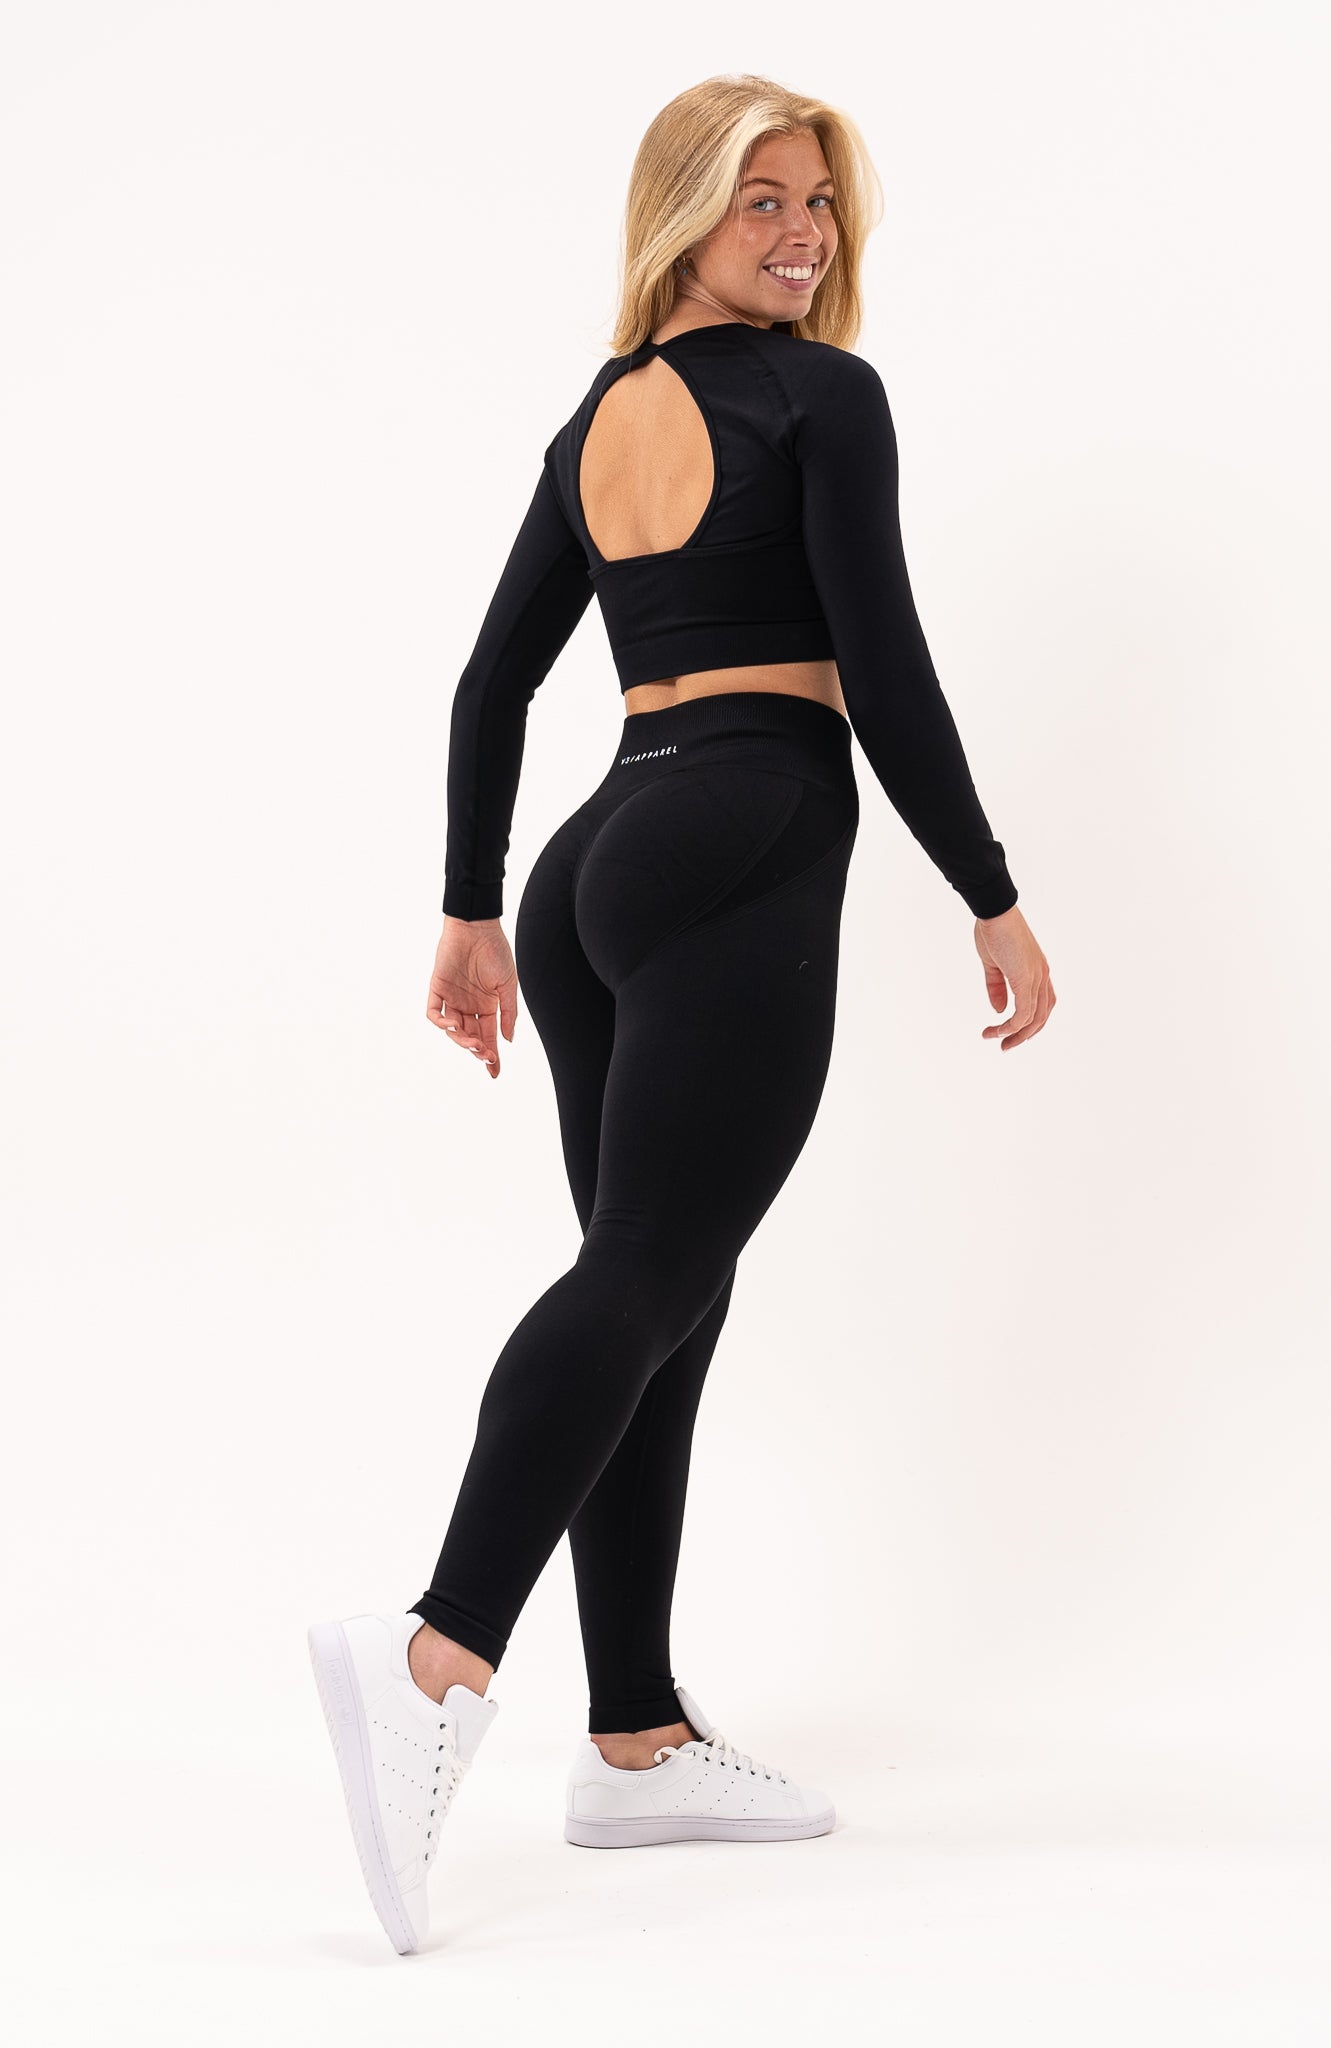 redbaysand Women's Tempo seamless long sleeve cropped training top in black with thumbhole long sleeves and crop fit for gym workouts training, Running, yoga, bodybuilding and bikini fitness.